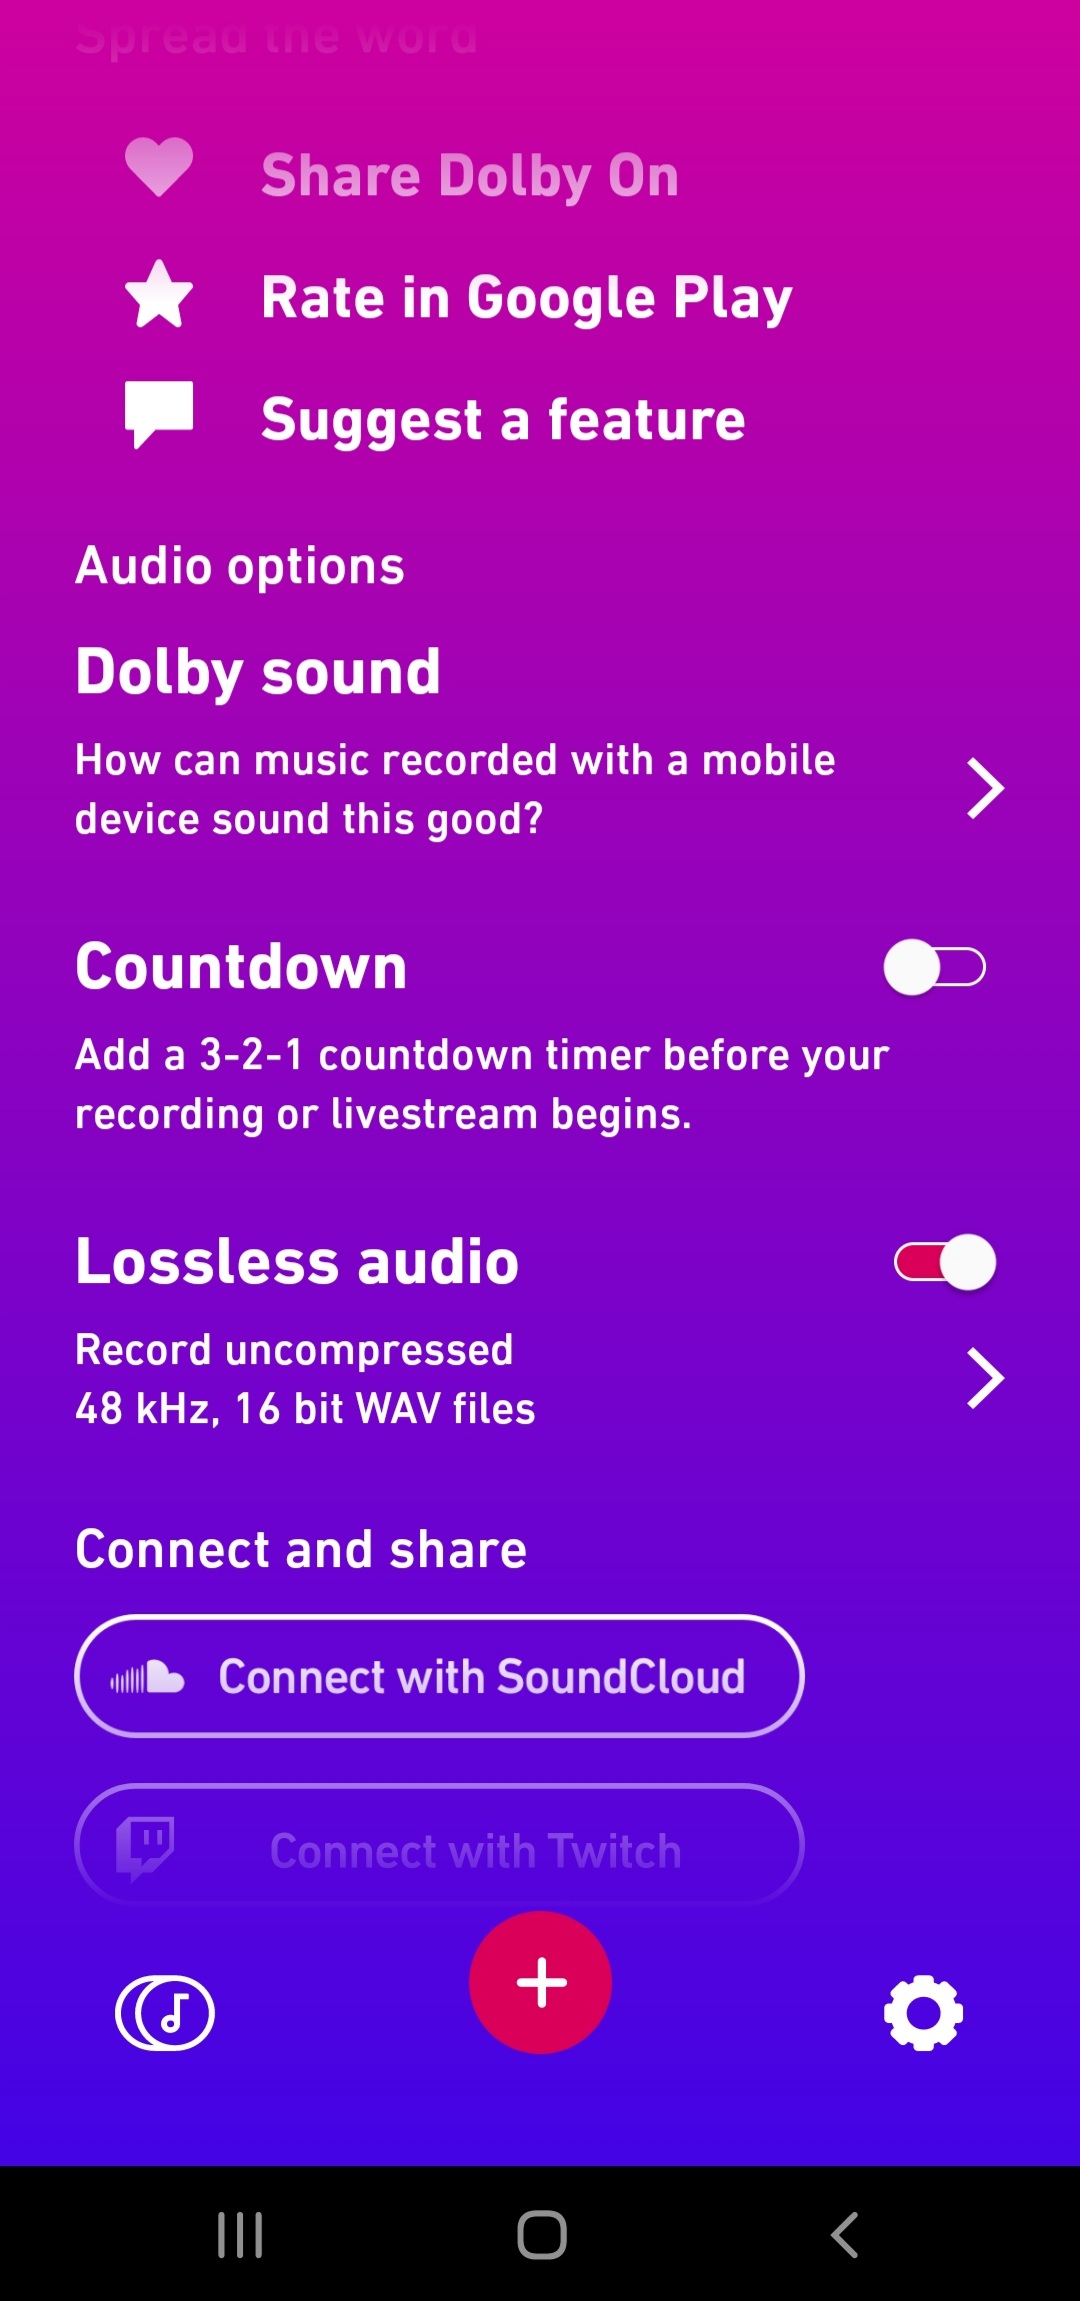 Dolby On settings screen